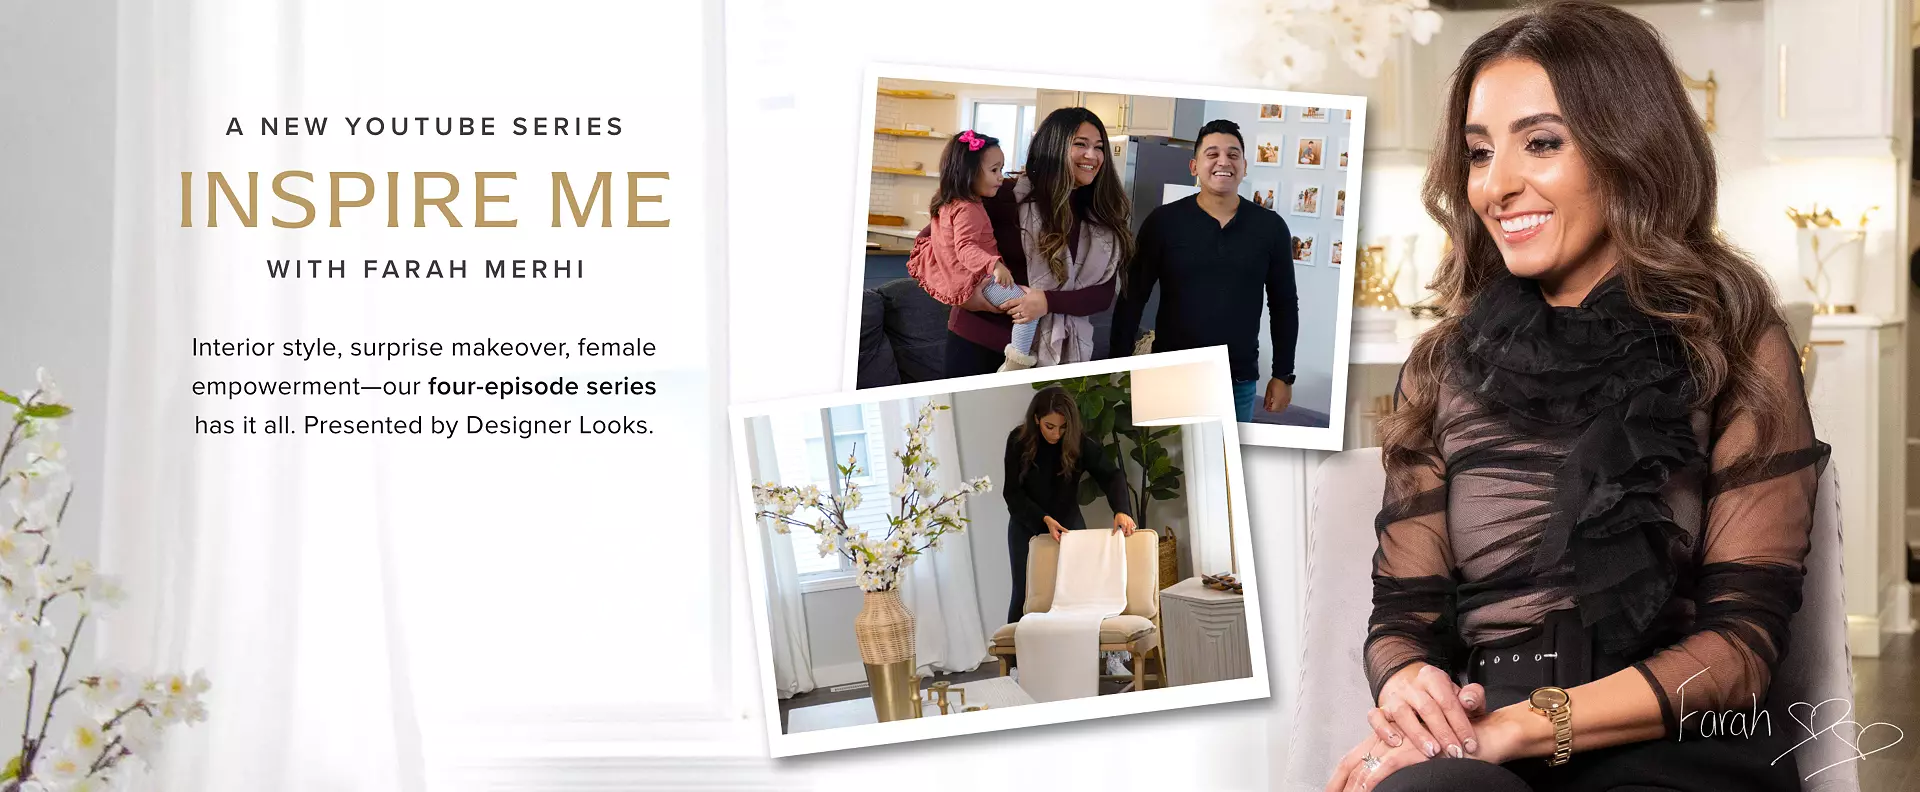 Coming February 2nd - A New YouTube Series: Inspire Me with Farah Merhi - Interior style, surprise makeovers, female empowerment this four-episode-series has it all.